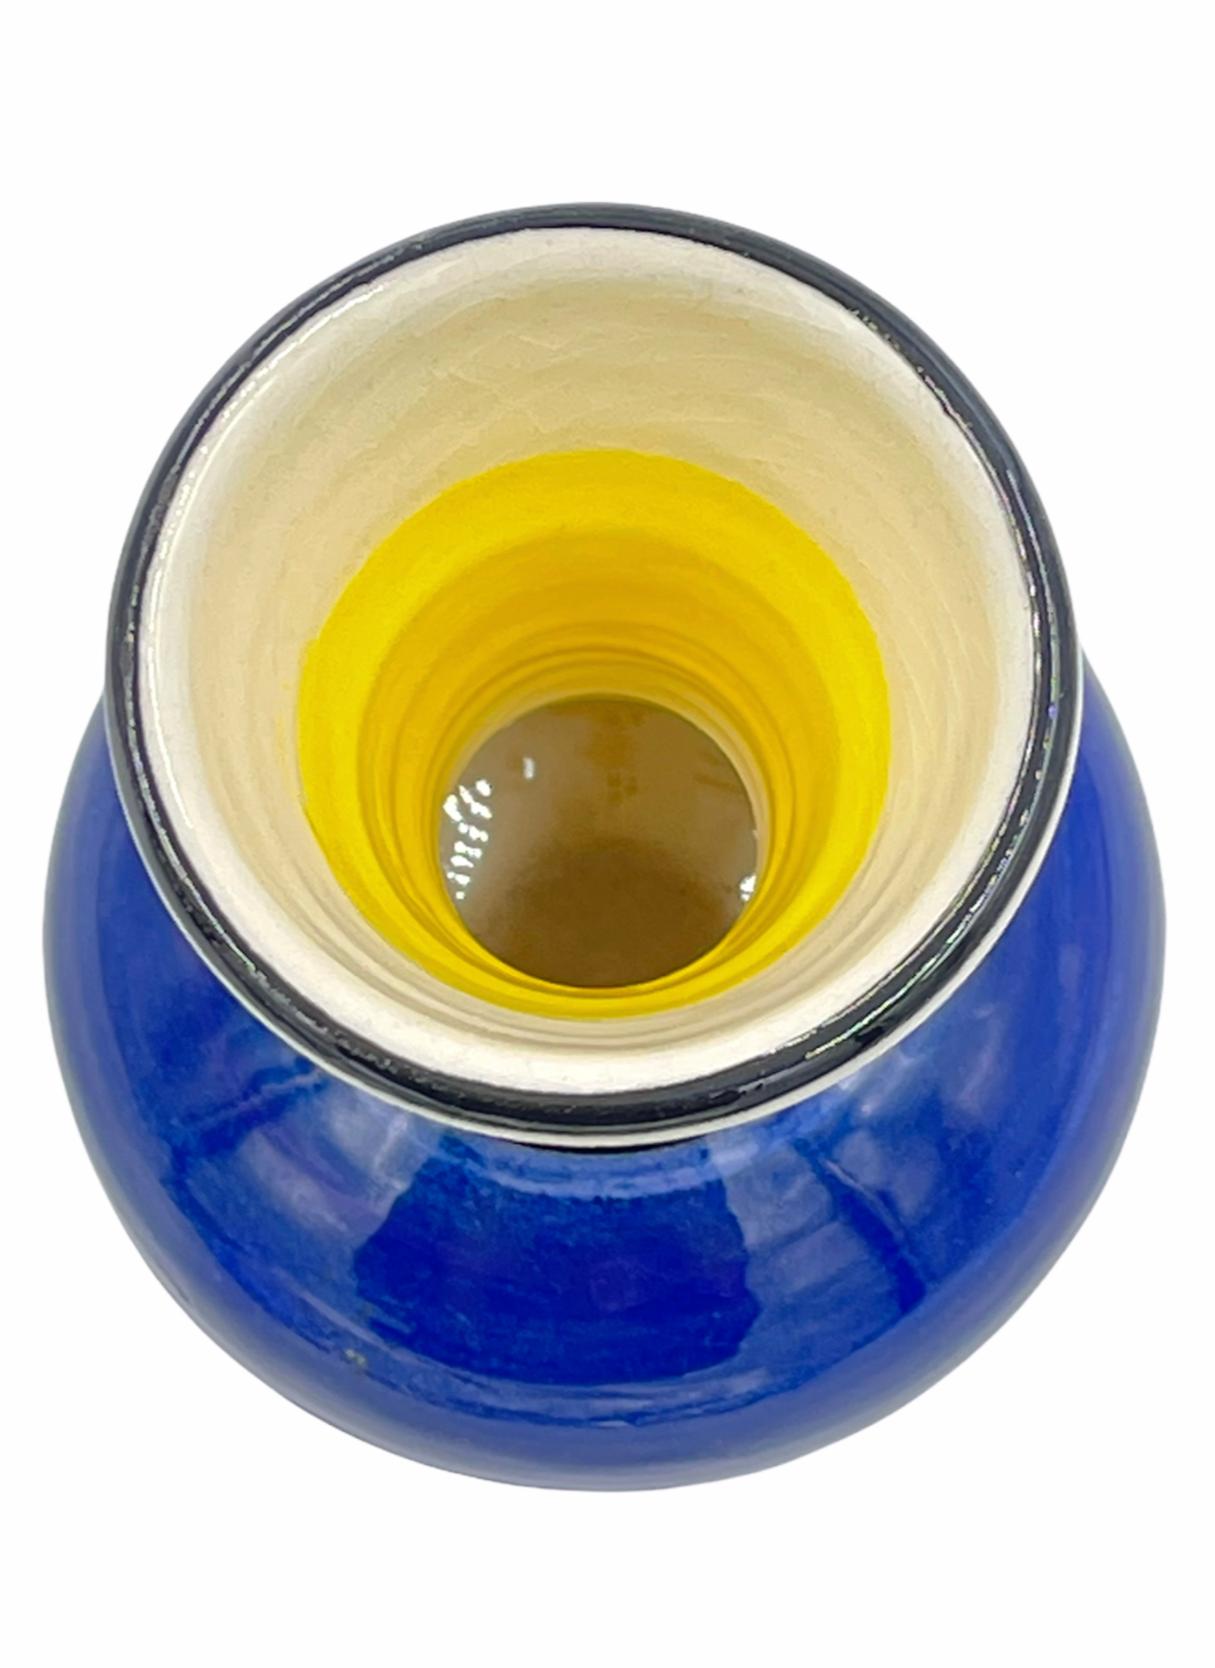 Modern Peter Shire Expo Vase 1998 For Sale